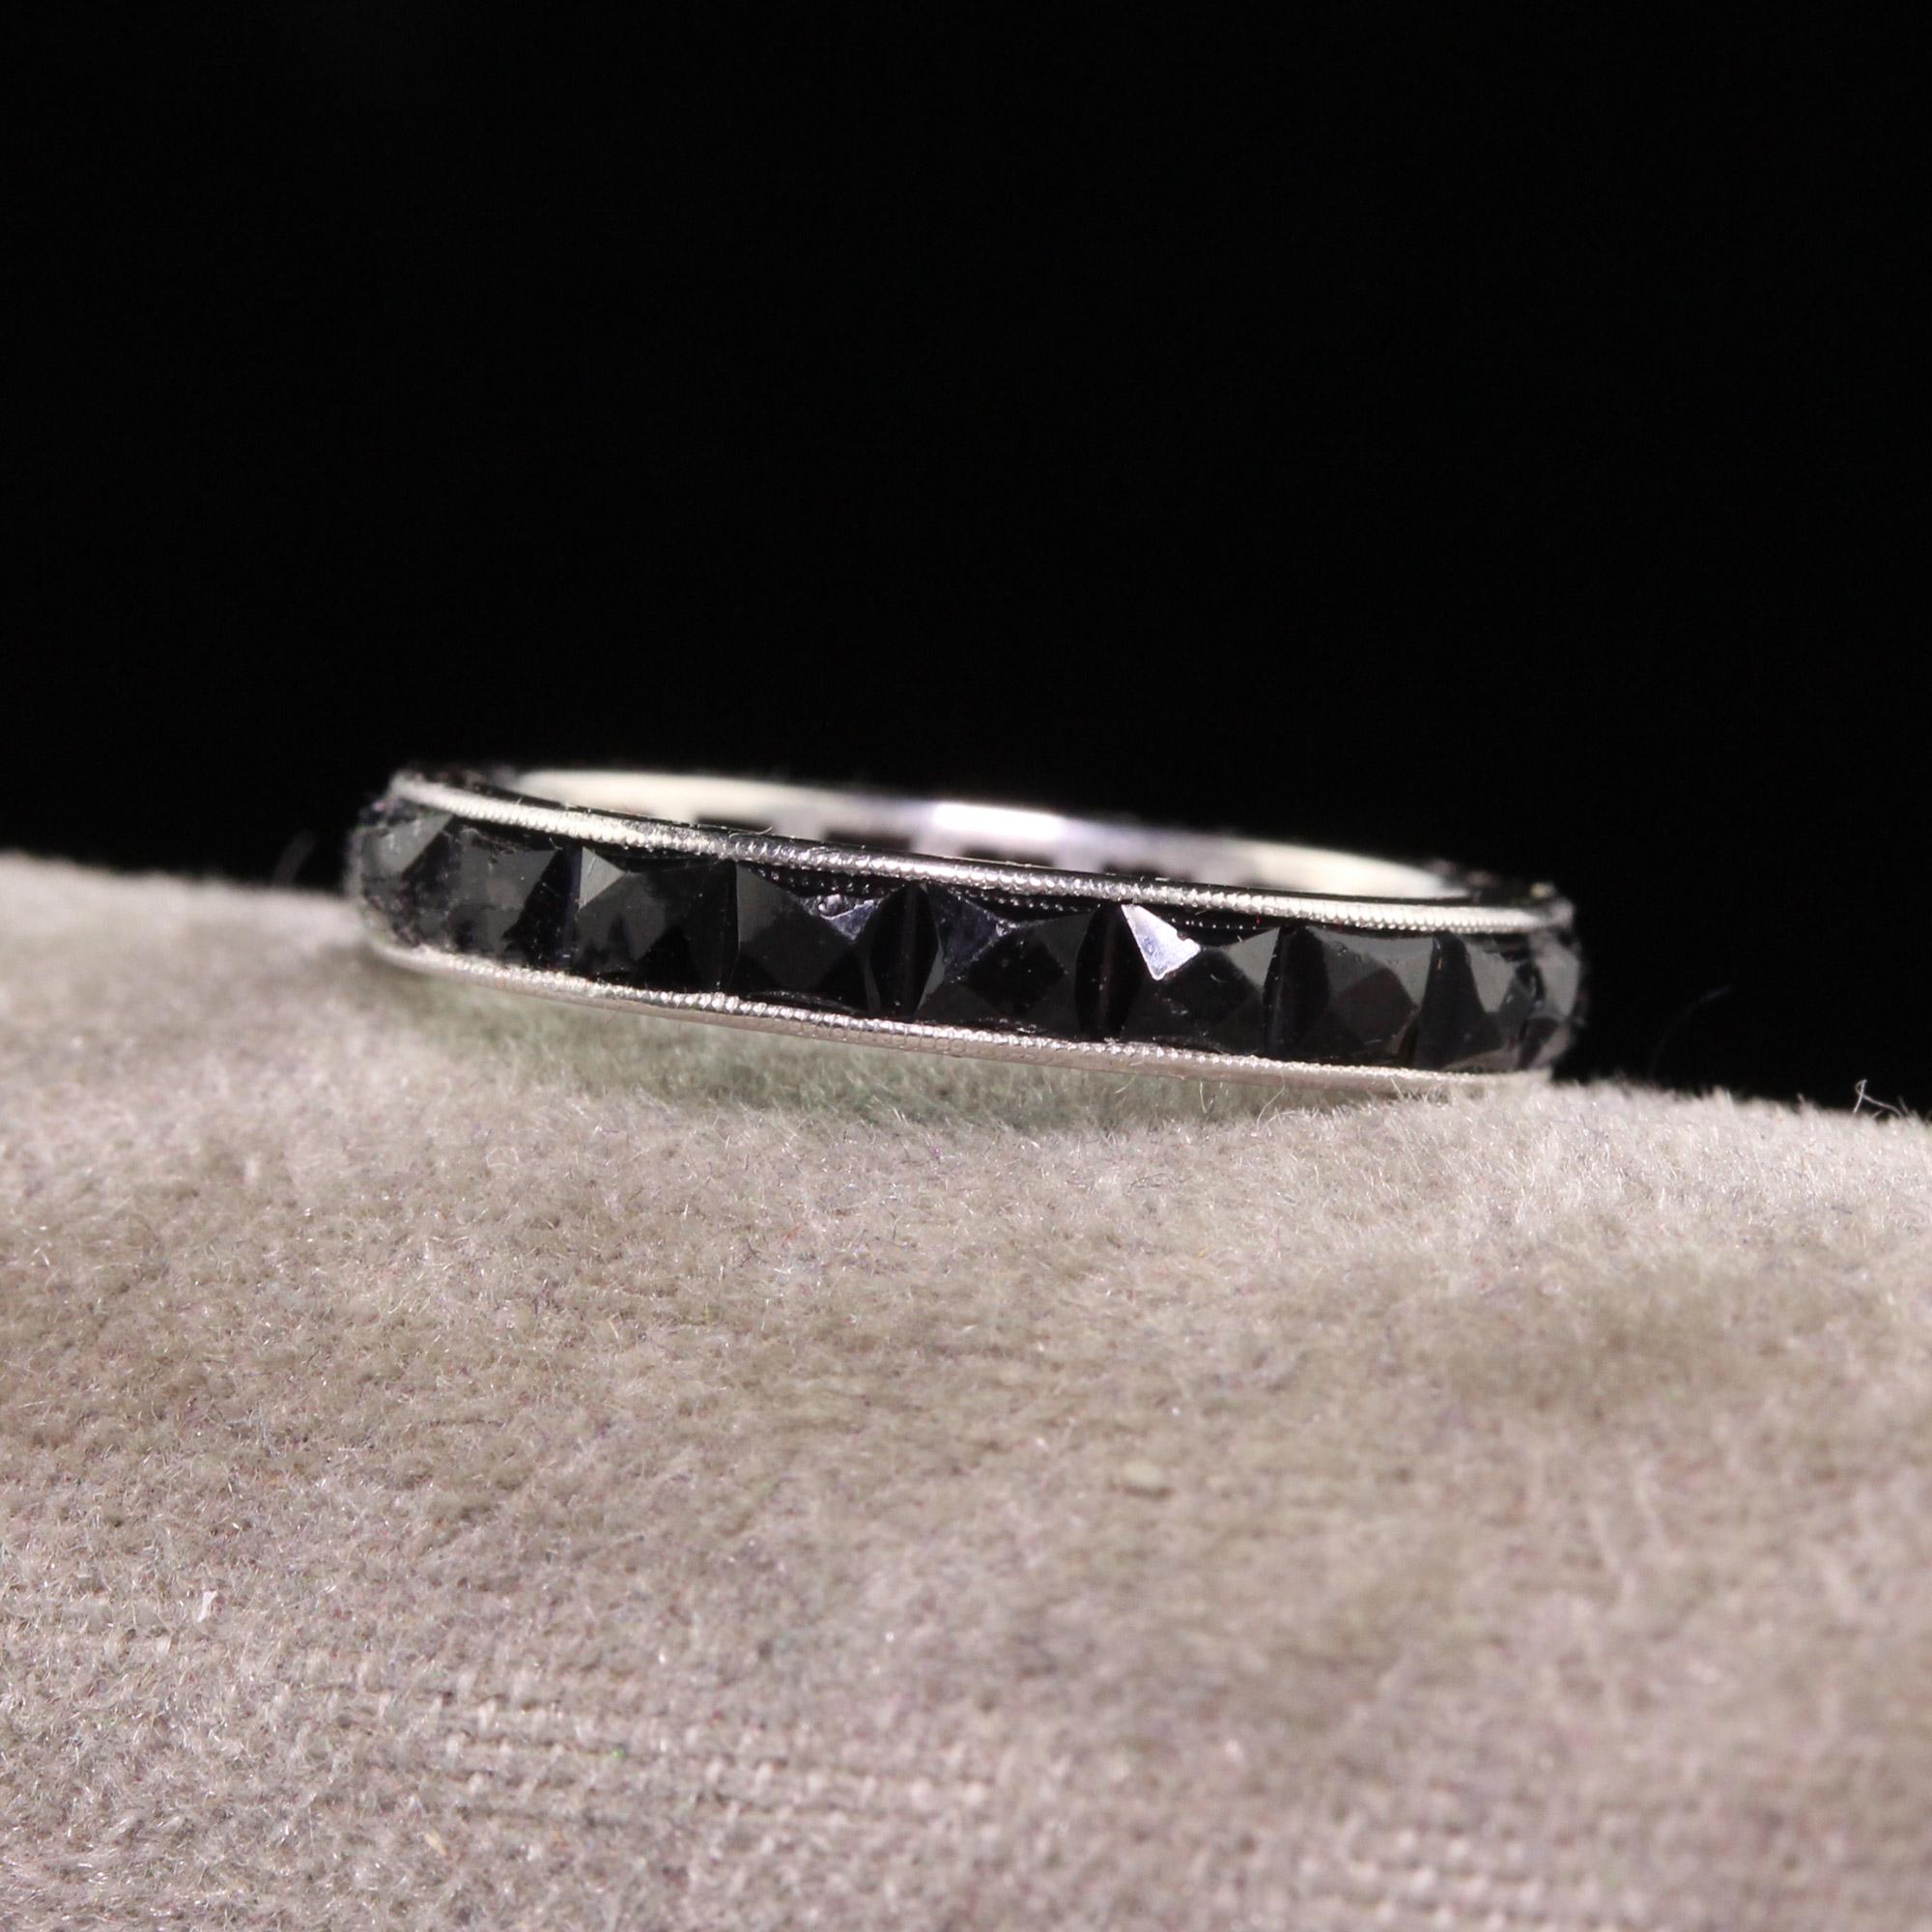 Beautiful Antique Art Deco Platinum French Cut Onyx Eternity Band - Size 4 3/4. This incredible eternity band is crafted in platinum. The ring has chunky french cut onyx set around the entire band. Some of the bands have slight abrasions or chips